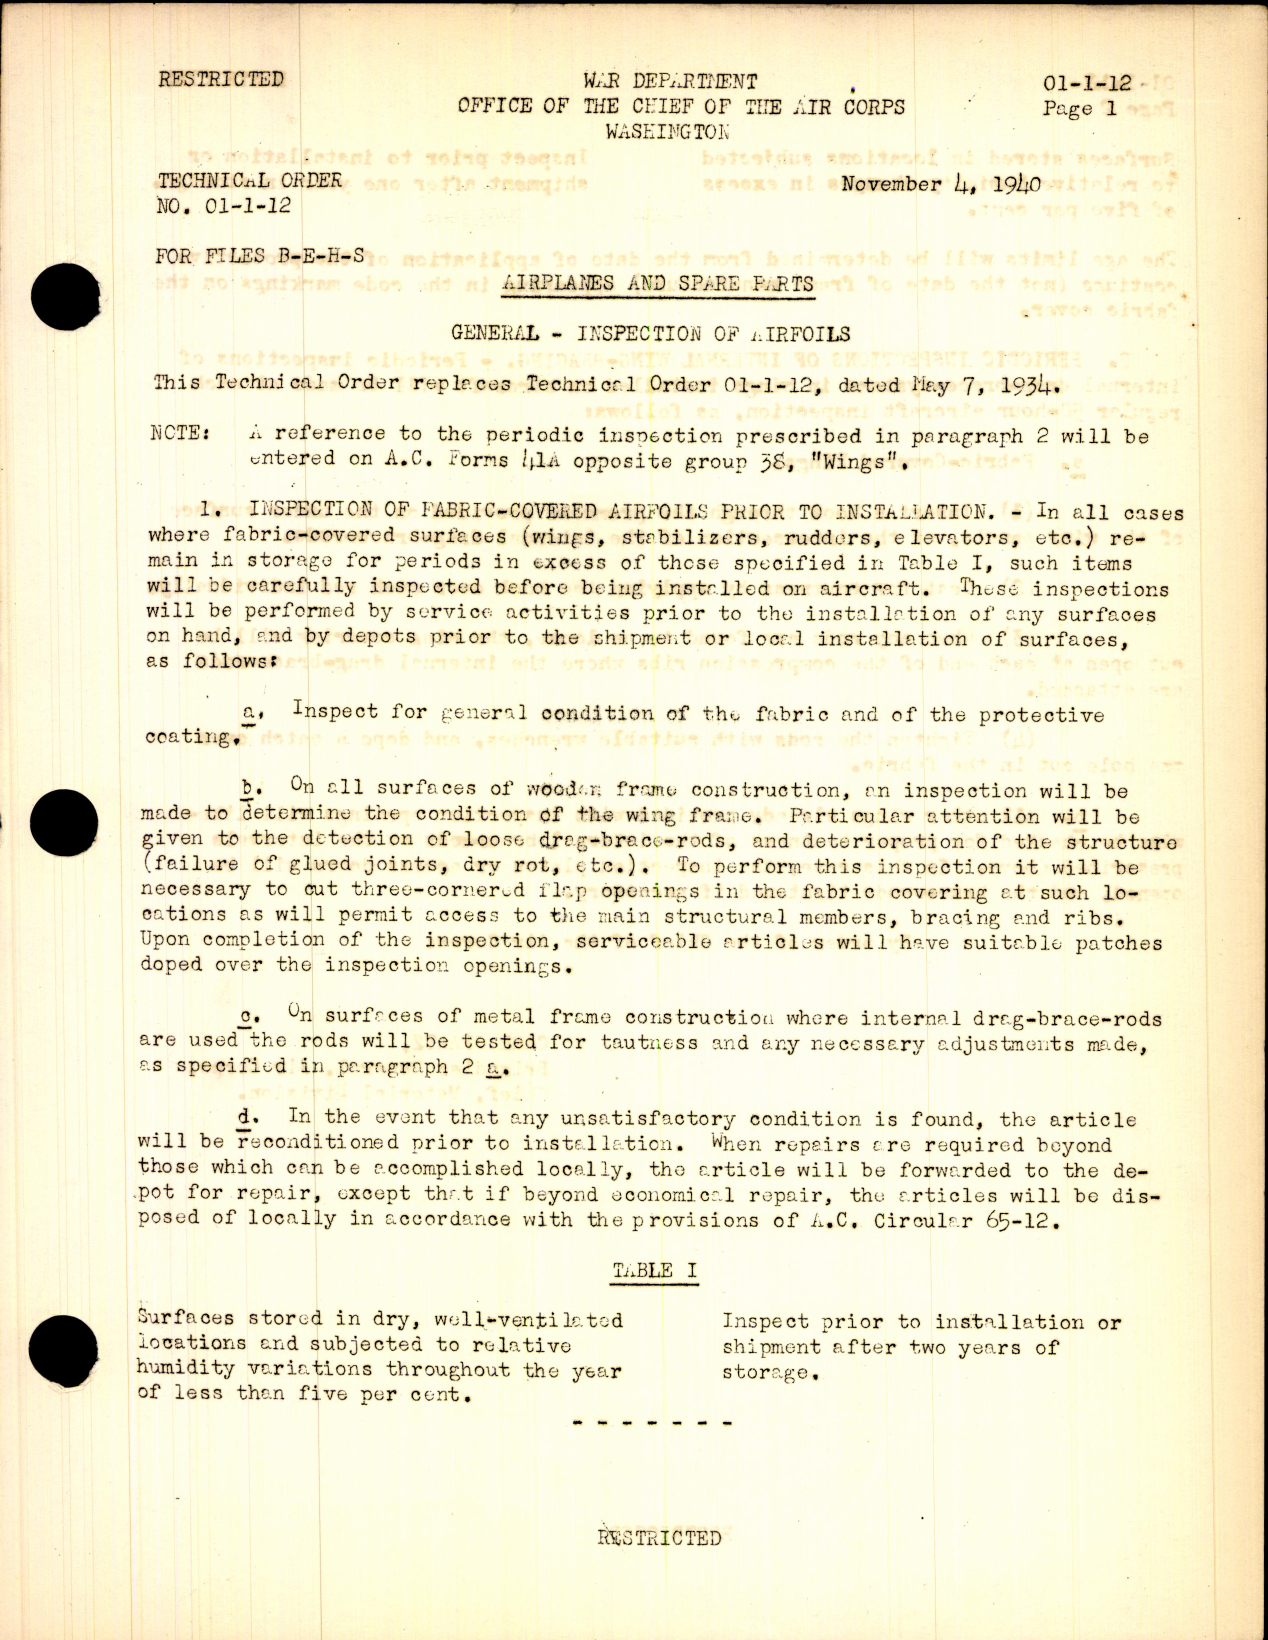 Sample page 1 from AirCorps Library document: Airplanes and Spare Parts for Inspection of Airfoils